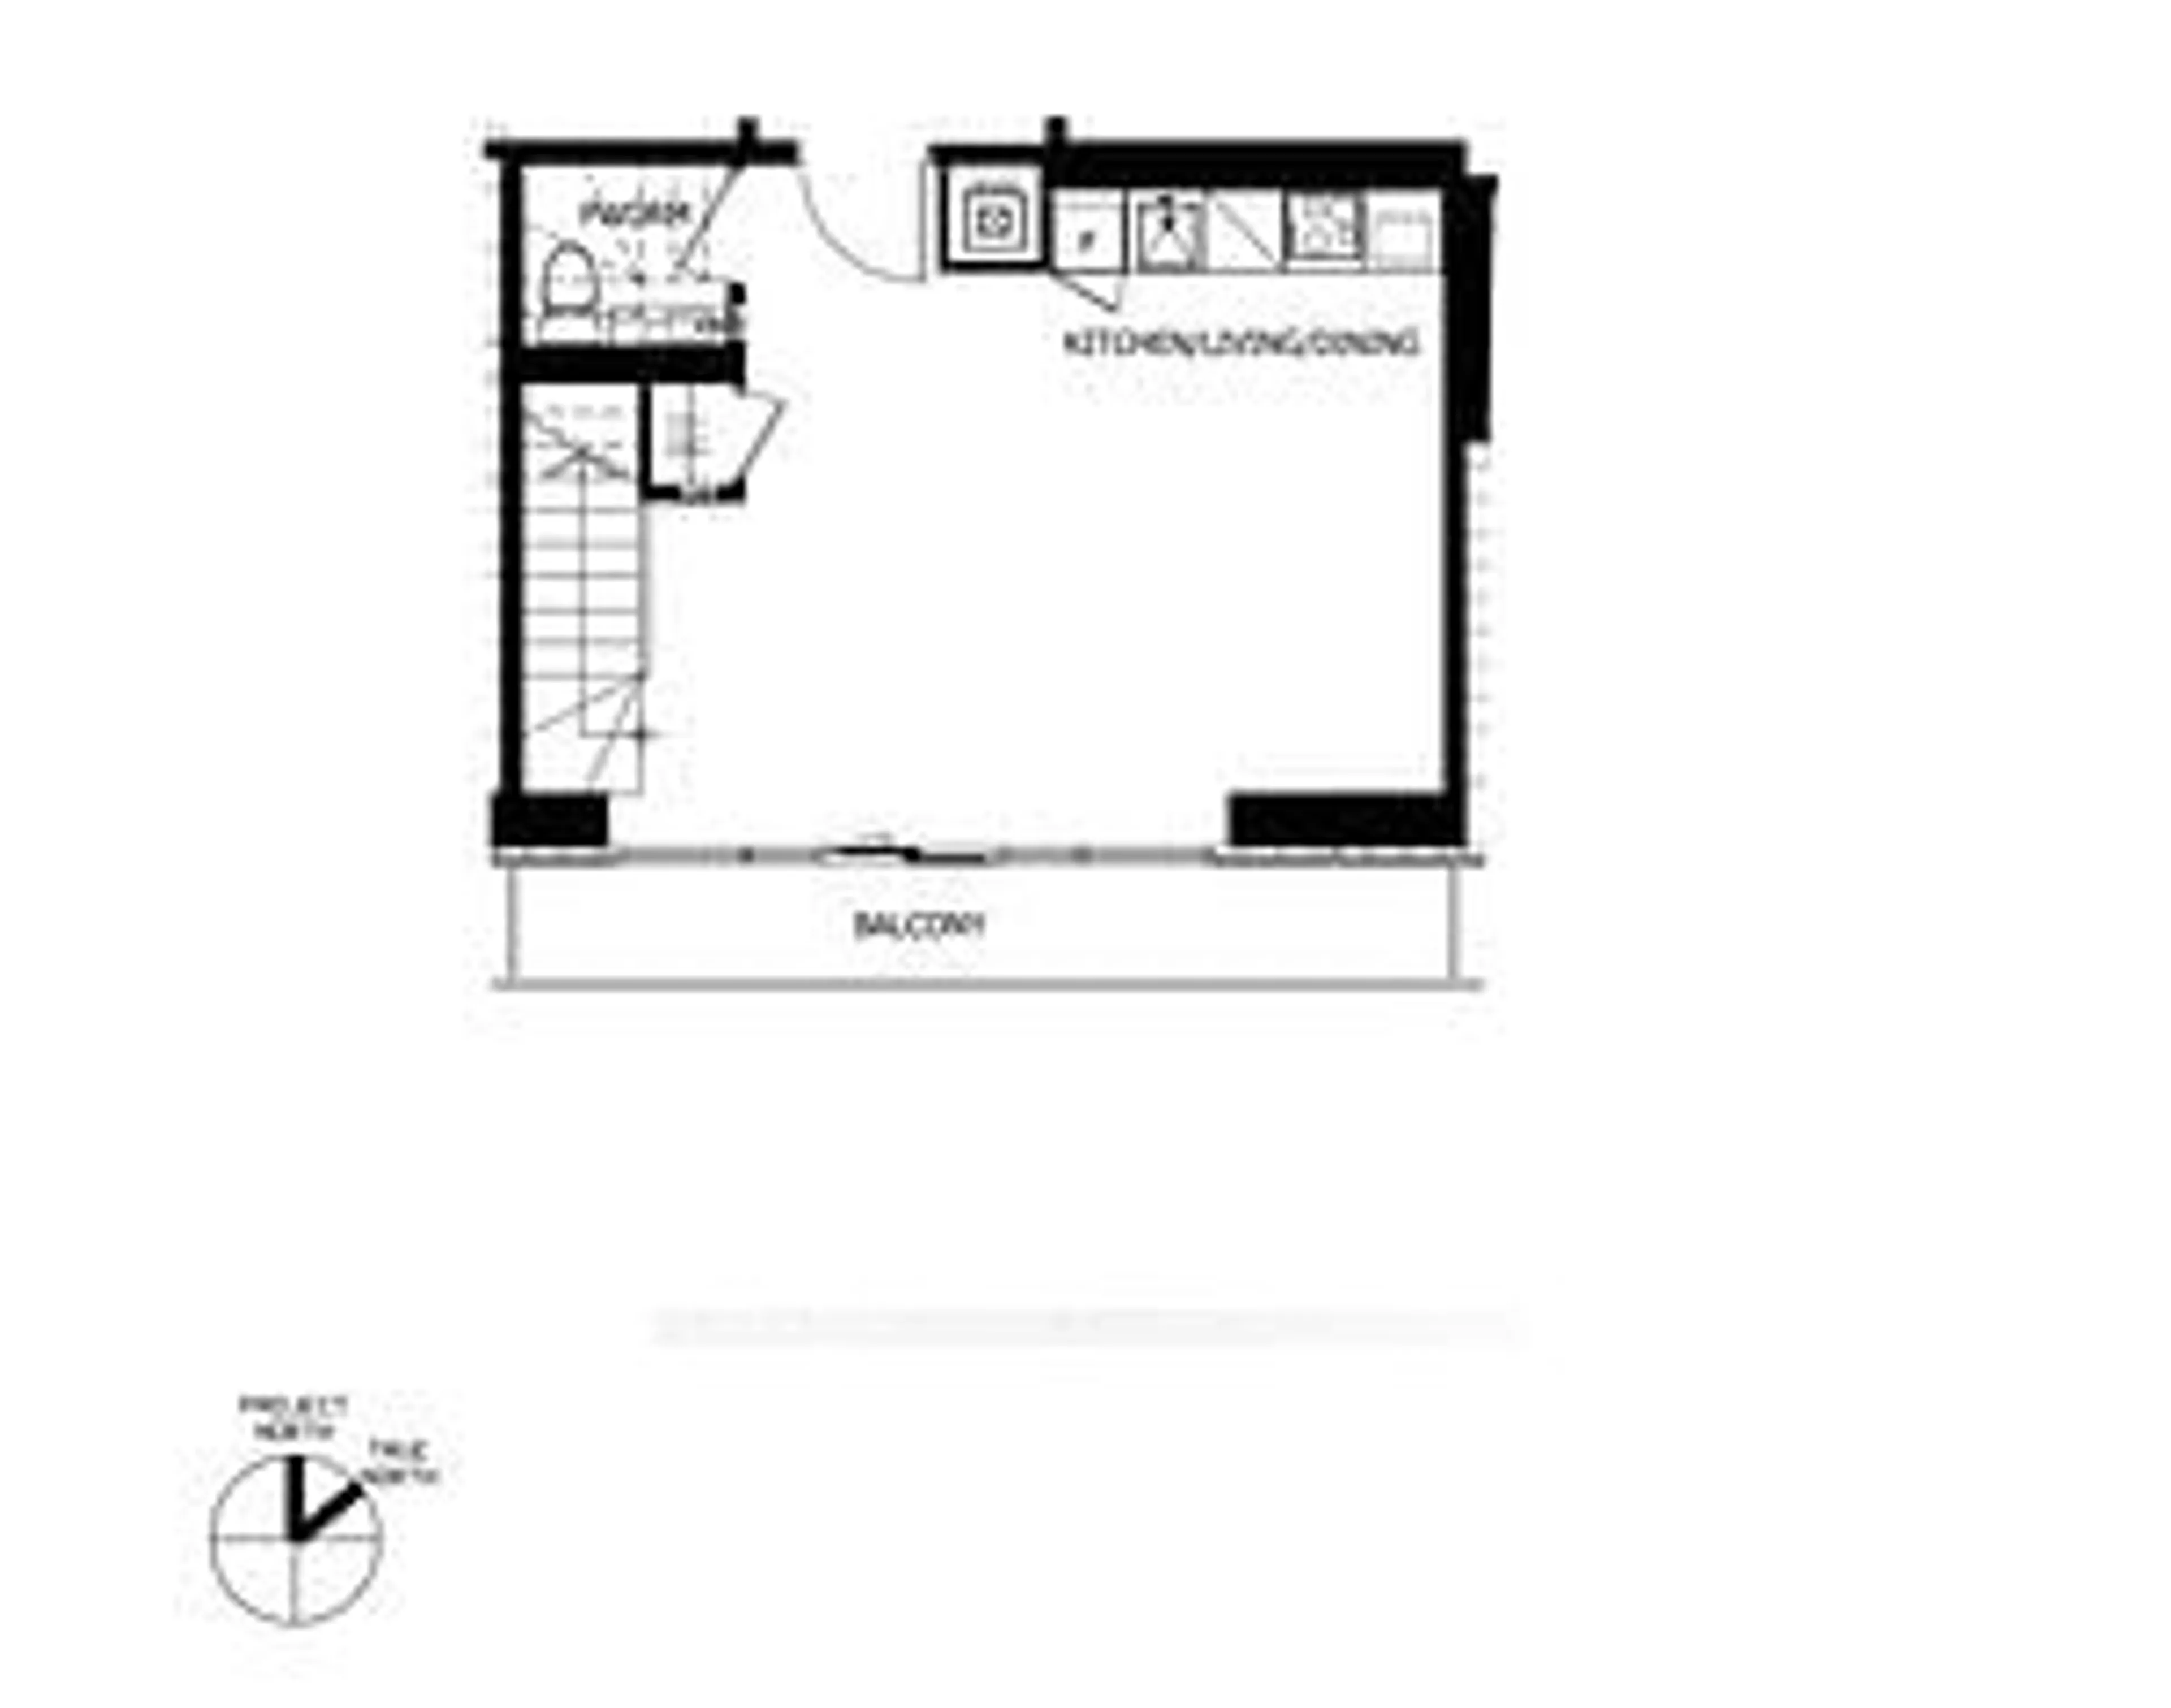 Floor plan for 3980 Confederation Pkwy #6004, Mississauga Ontario L5B 0K7